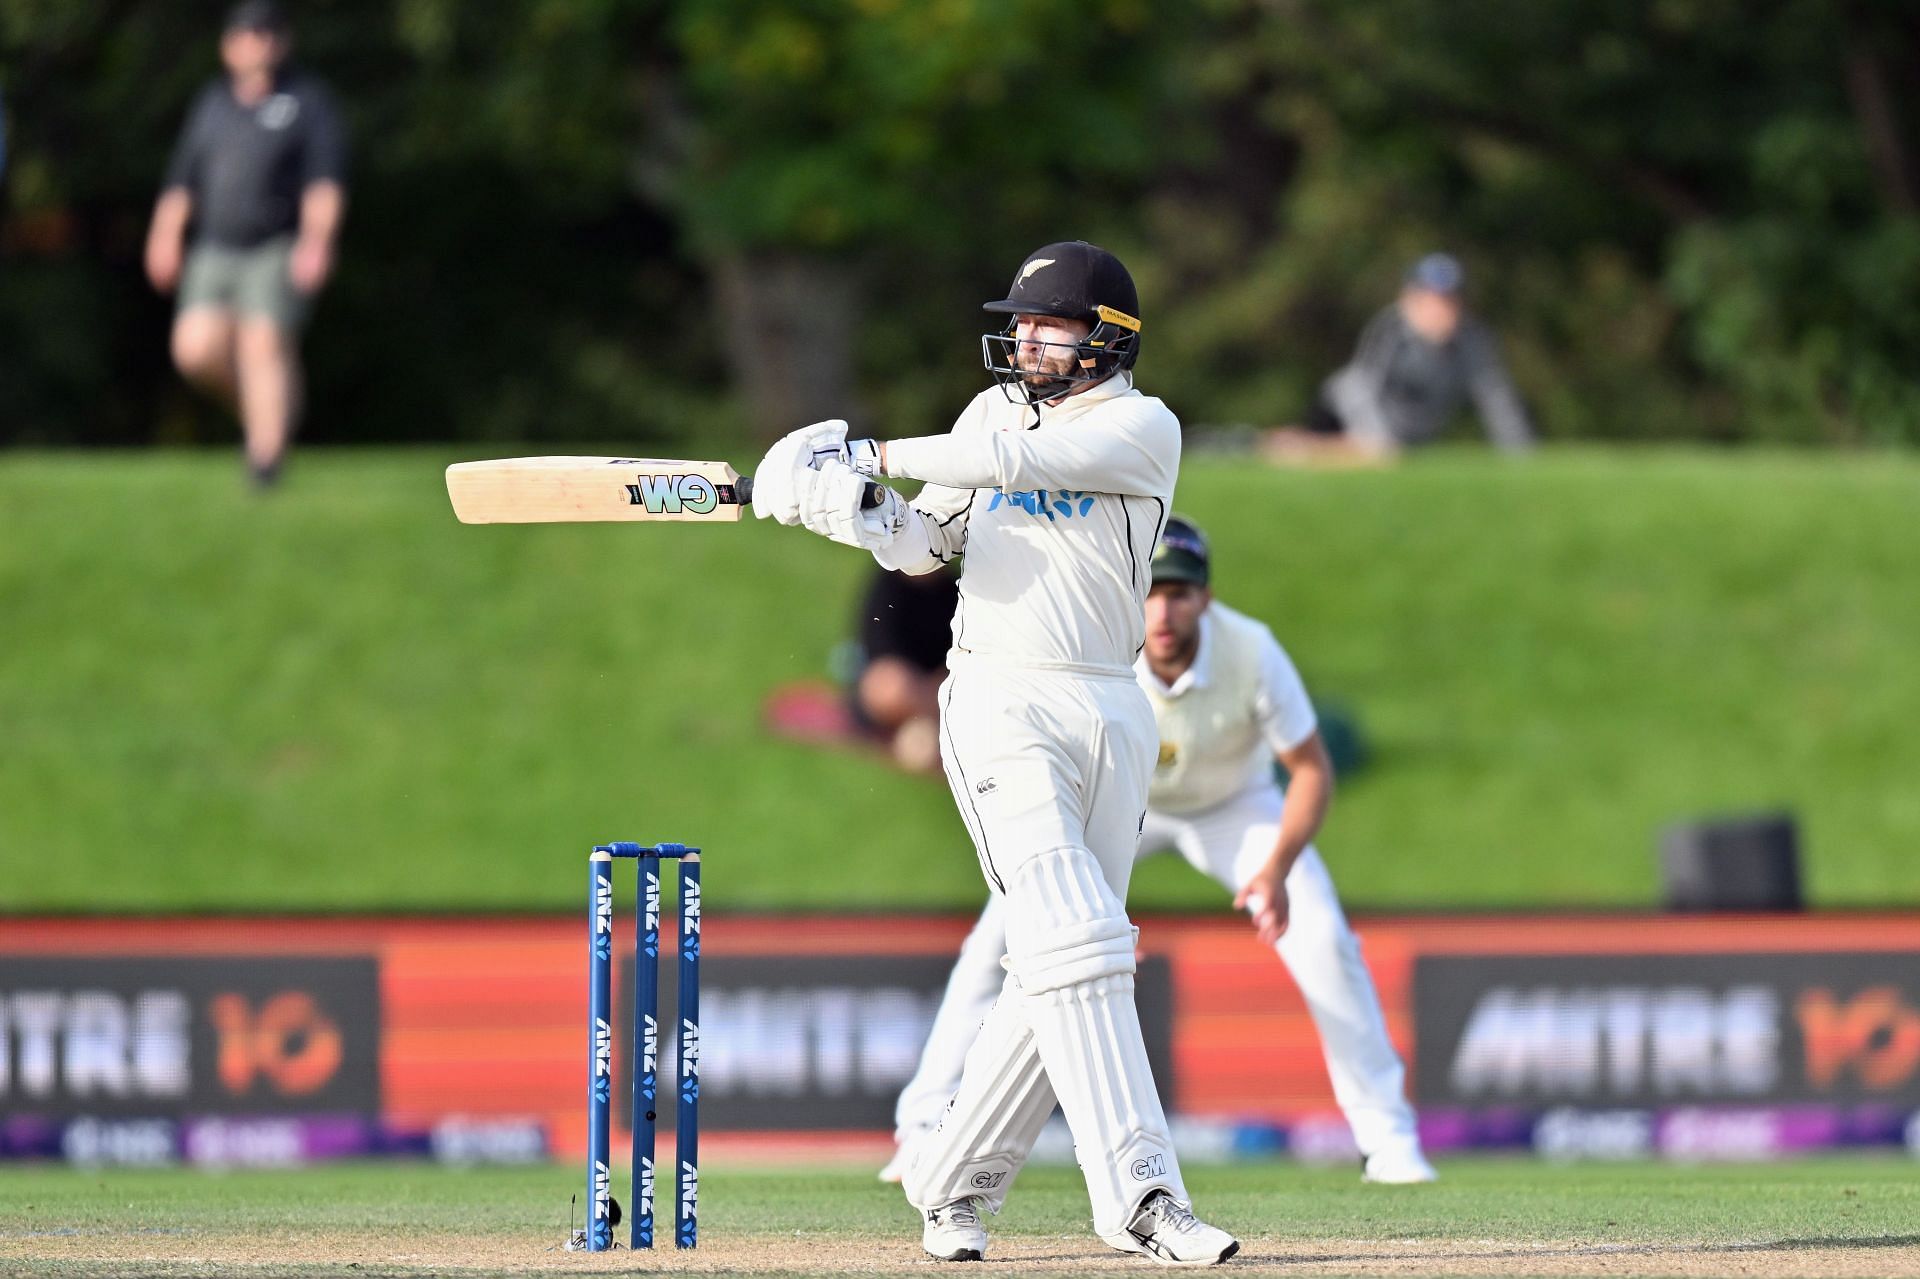 Devon Conway in action in New Zealand vs South Africa - 2nd Test: Day 4